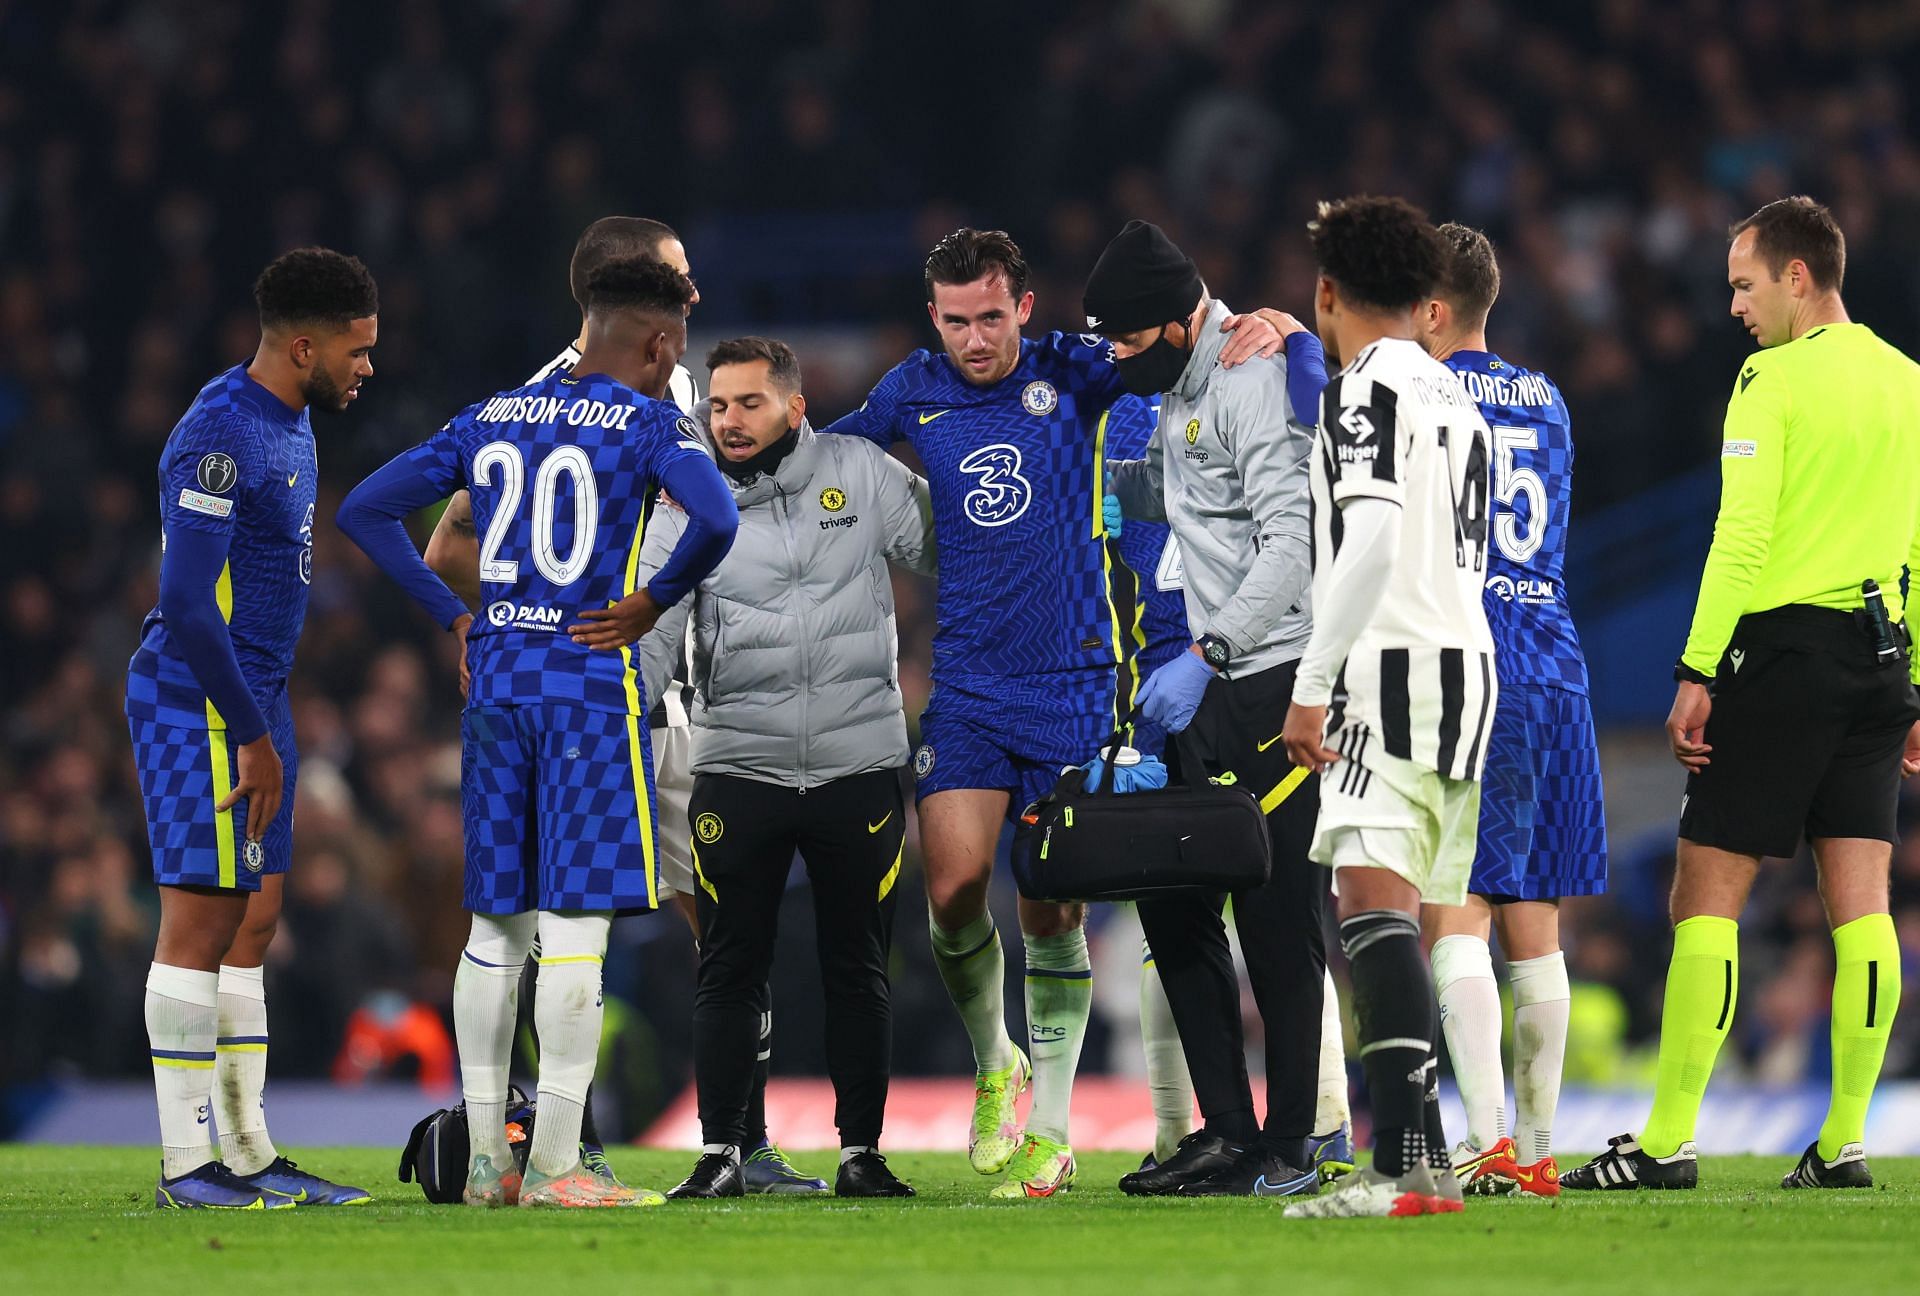 Ben Chilwell will require knee surgery, ruling him out of action for Chelsea